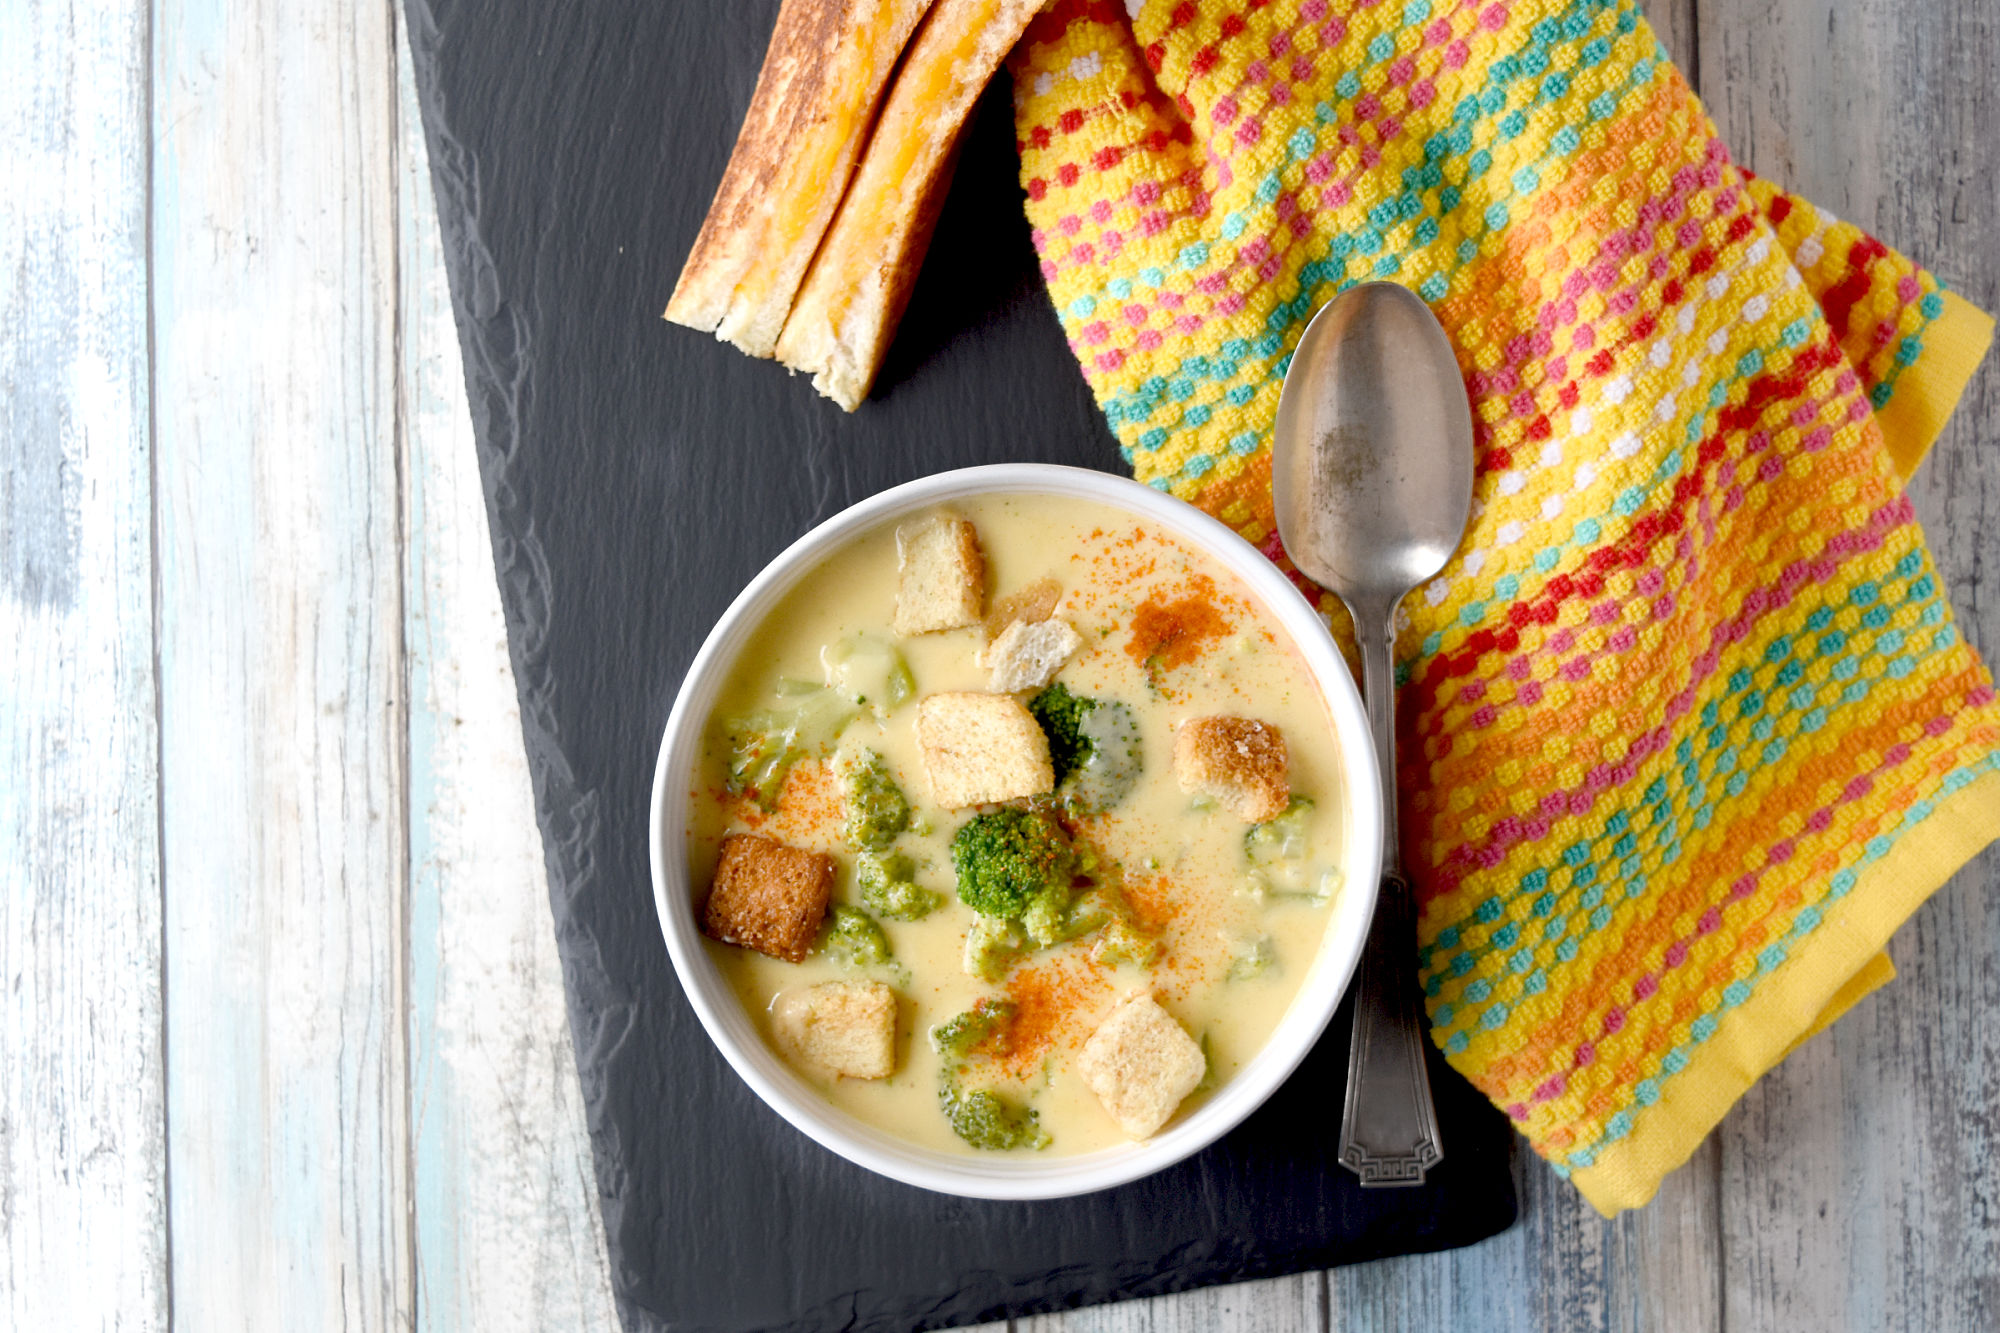 Easy Broccoli Cheese Soup cooks up quickly and tastes super delicious.  It’s fast enough for a quick lunch or easy dinner with a sandwich and delicious enough to make you lick the bowl clean.  #FallFlavors #broccolicheesesoup #easysoup #cheesesoup #extracheesy